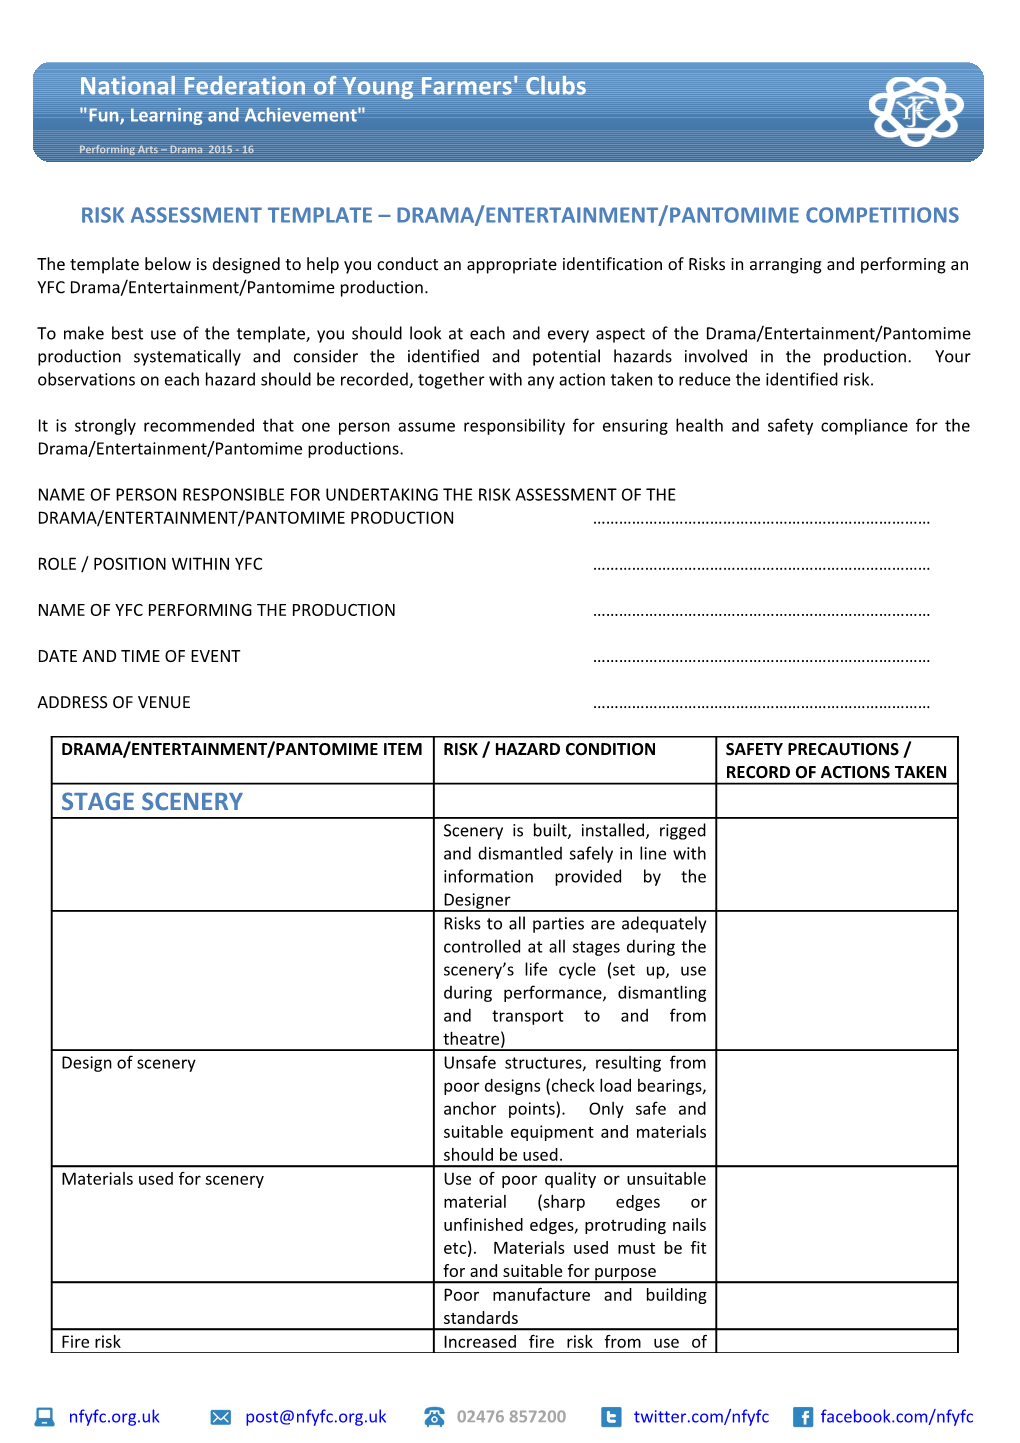 Risk Assessment Template Drama/Entertainment/Pantomime Competitions